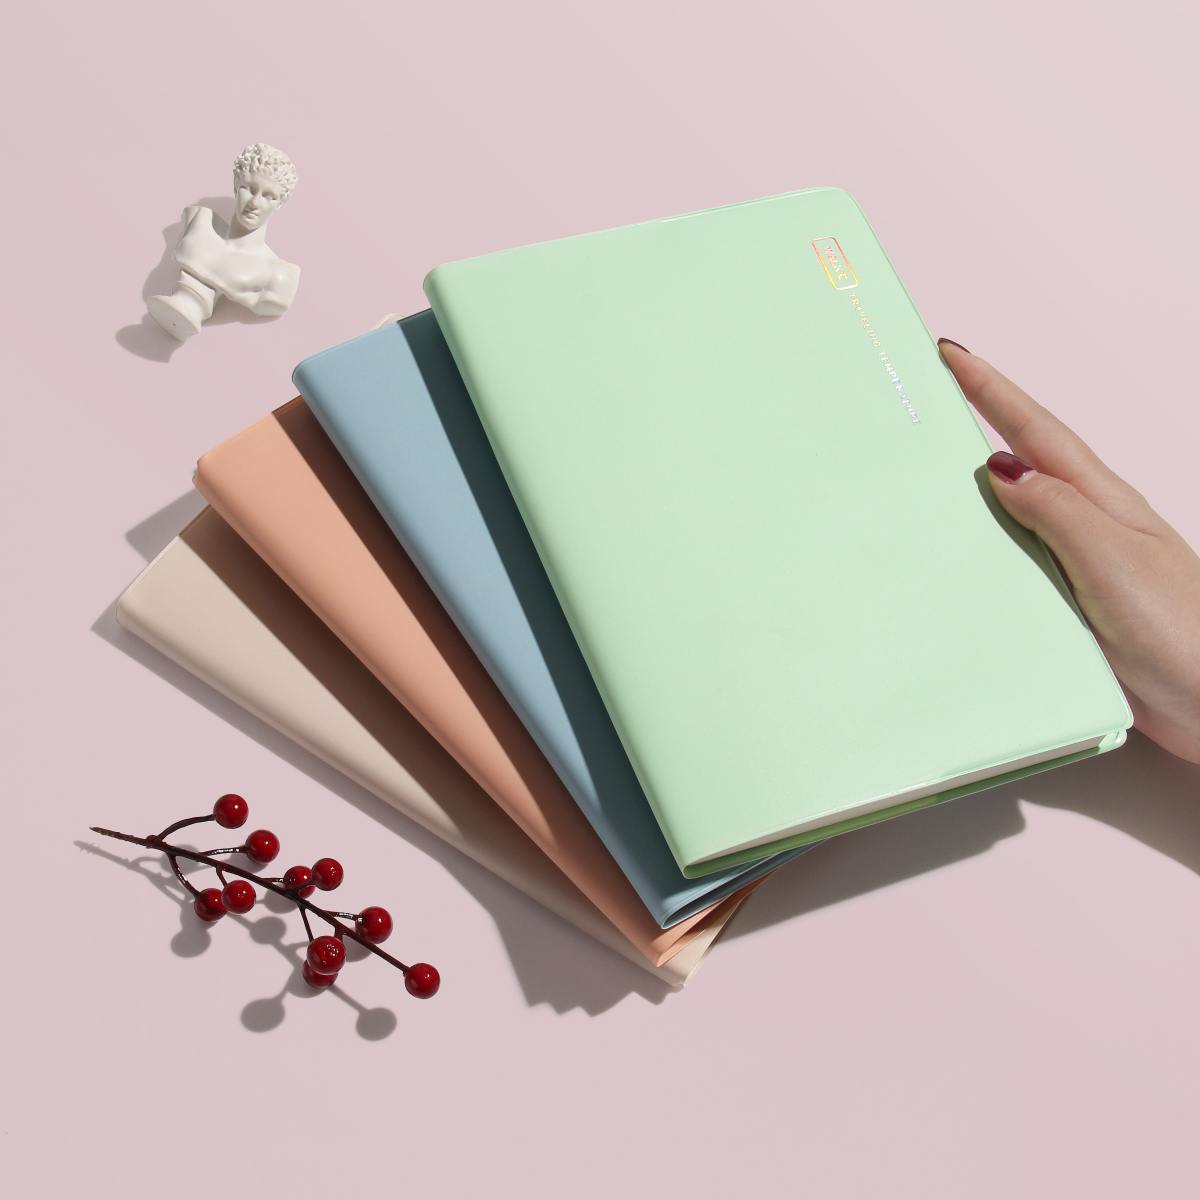 These aesthetic bullet journal covers are nothing short of beautiful!